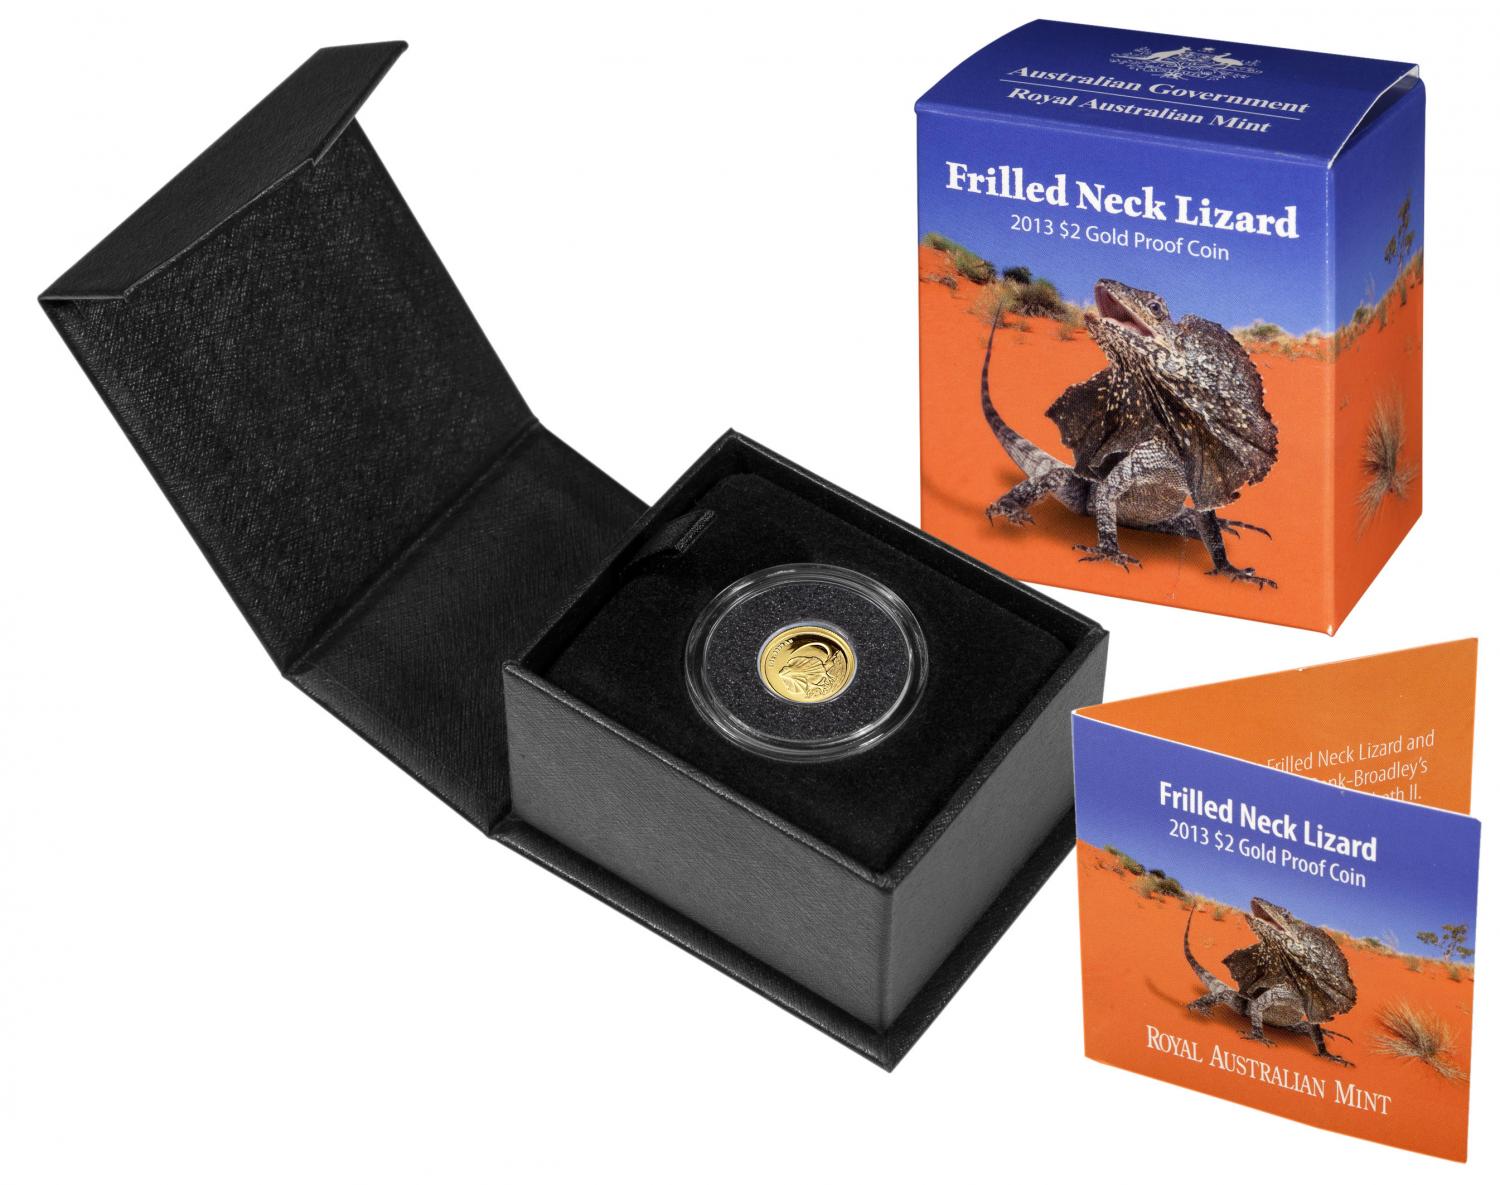 Thumbnail for 2013 Frilled Neck Lizard $2.00 Gold Proof